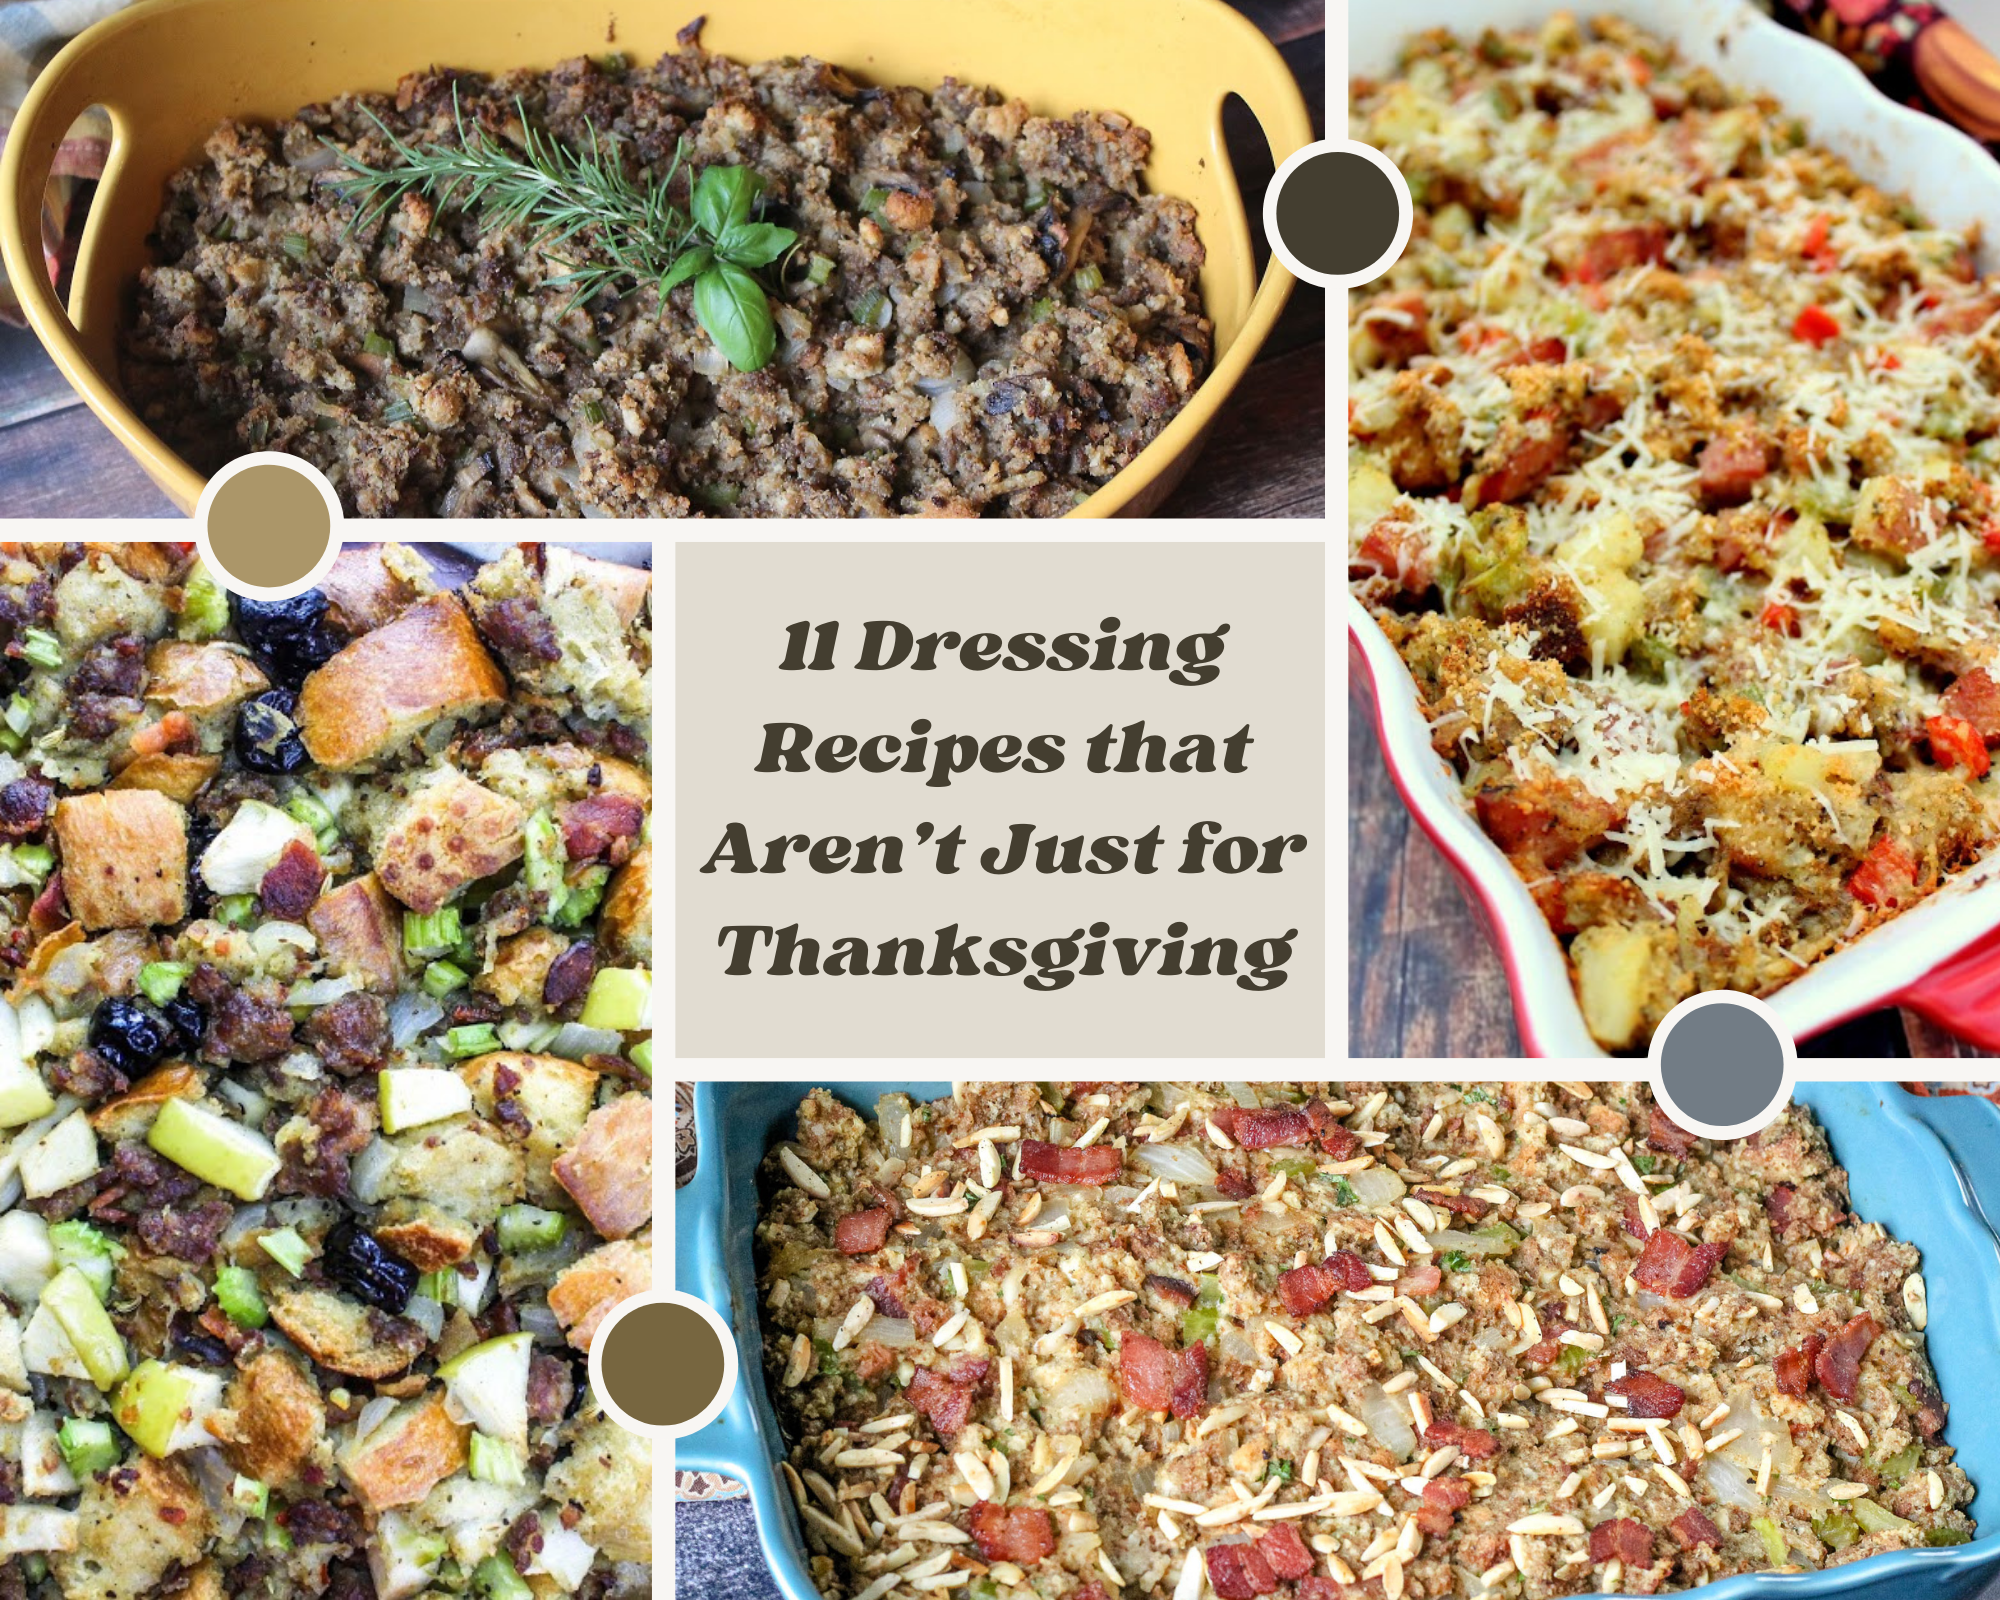 Dressing and Stuffing Recipes